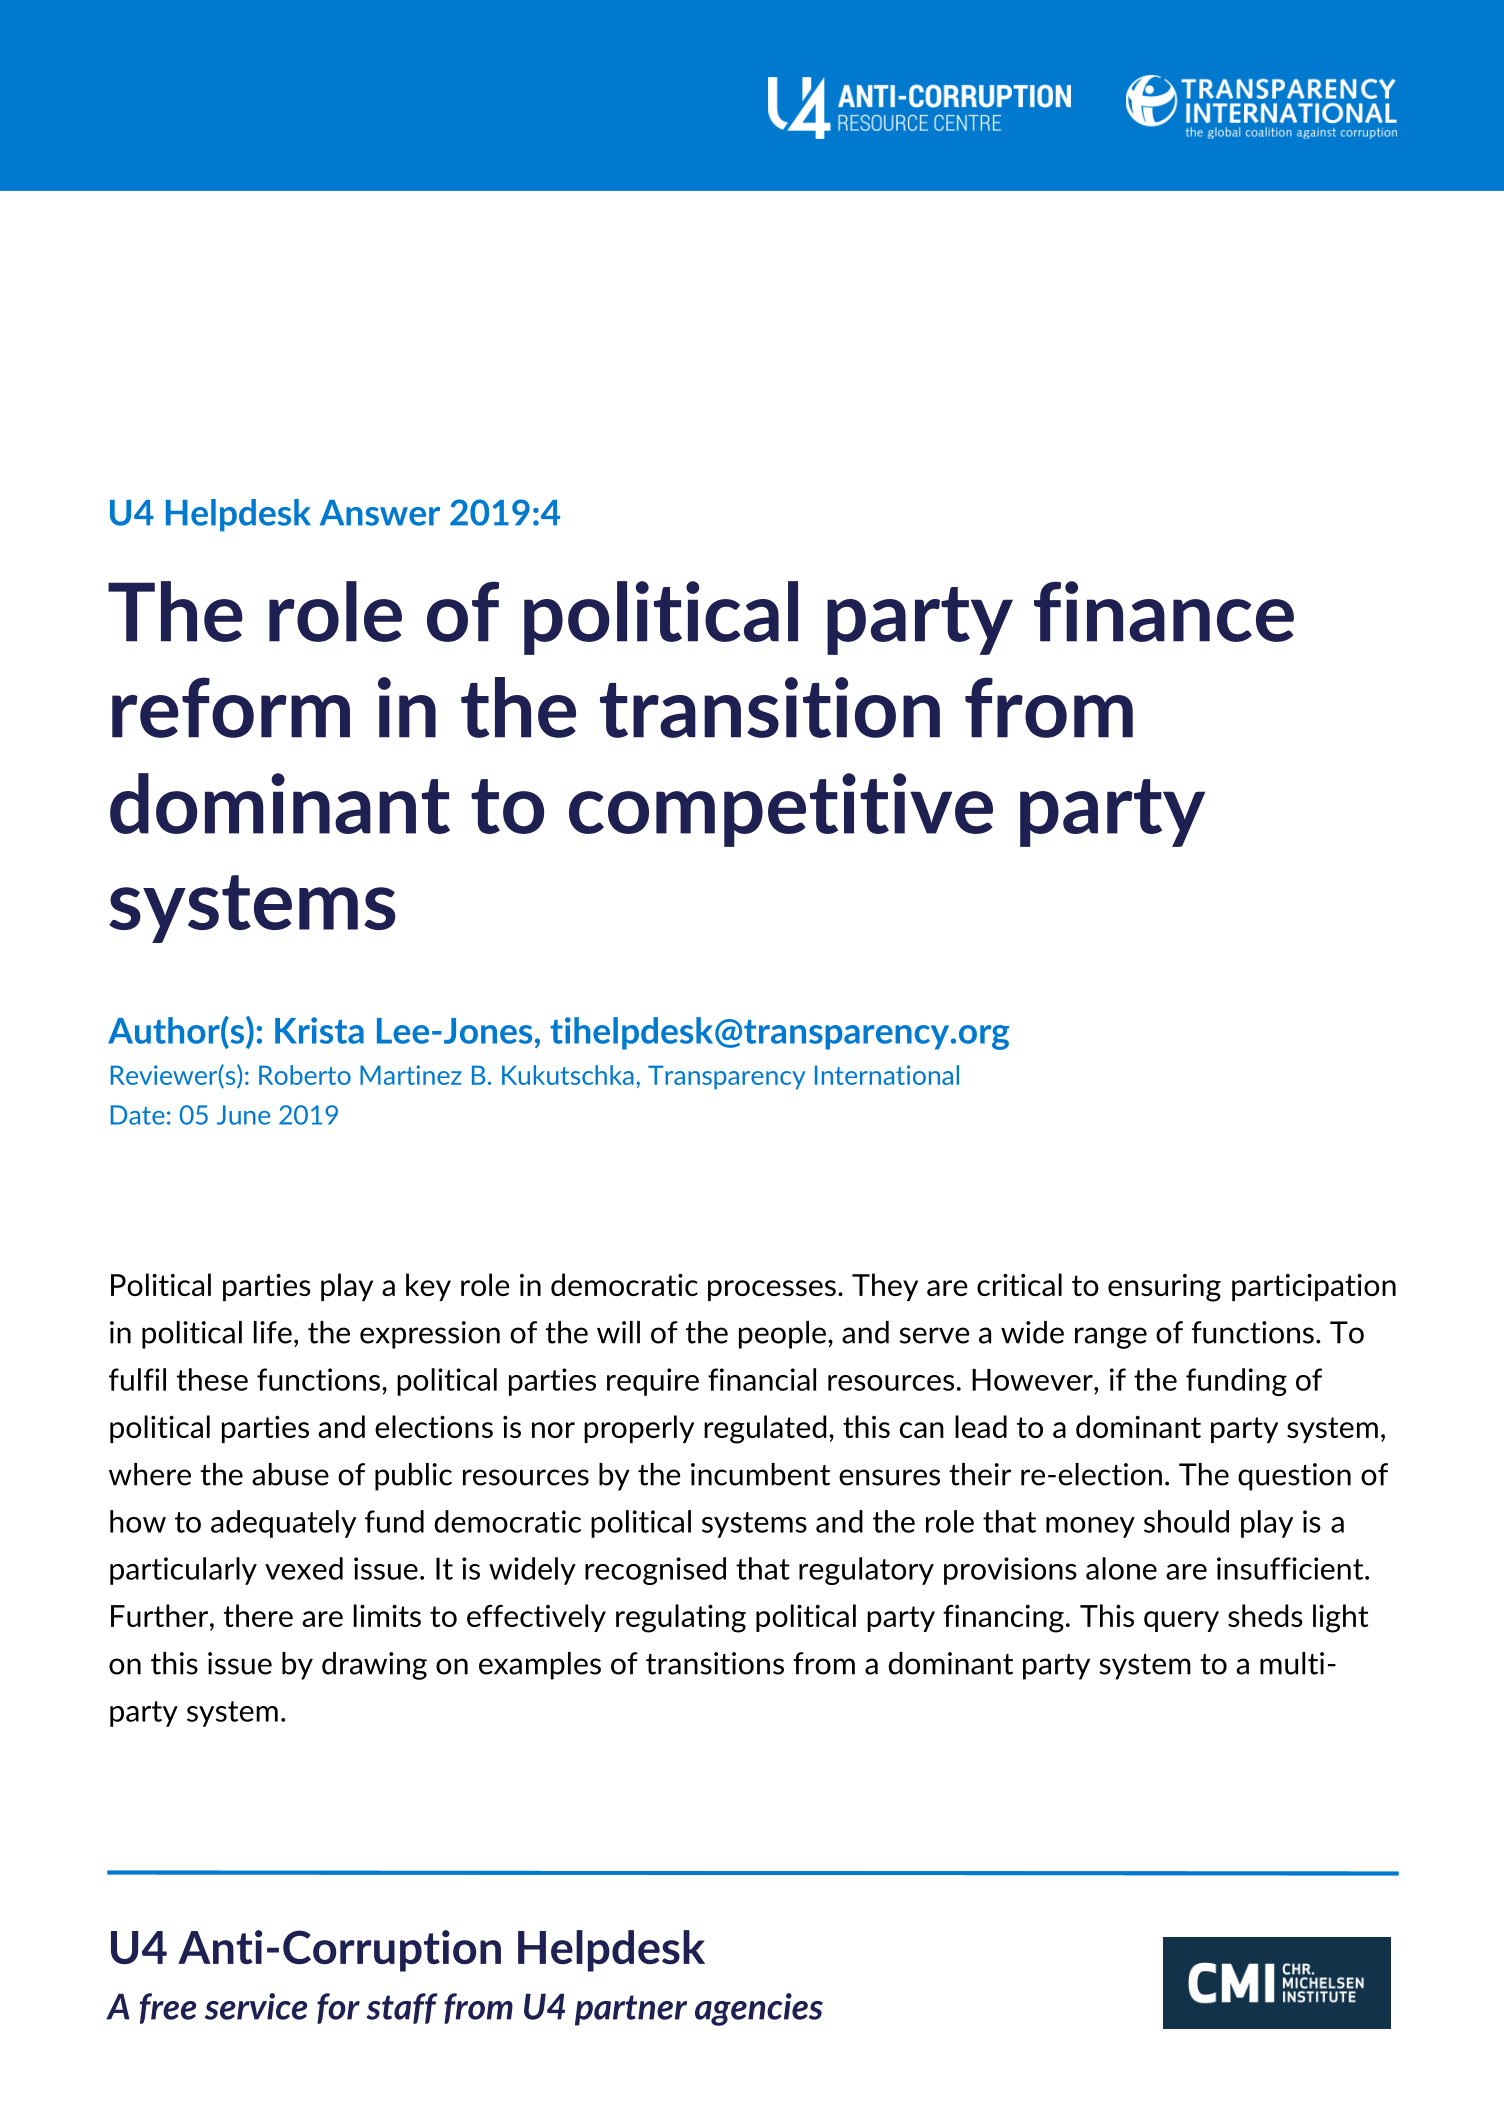 The role of political party finance reform in the transition from dominant to competitive party systems